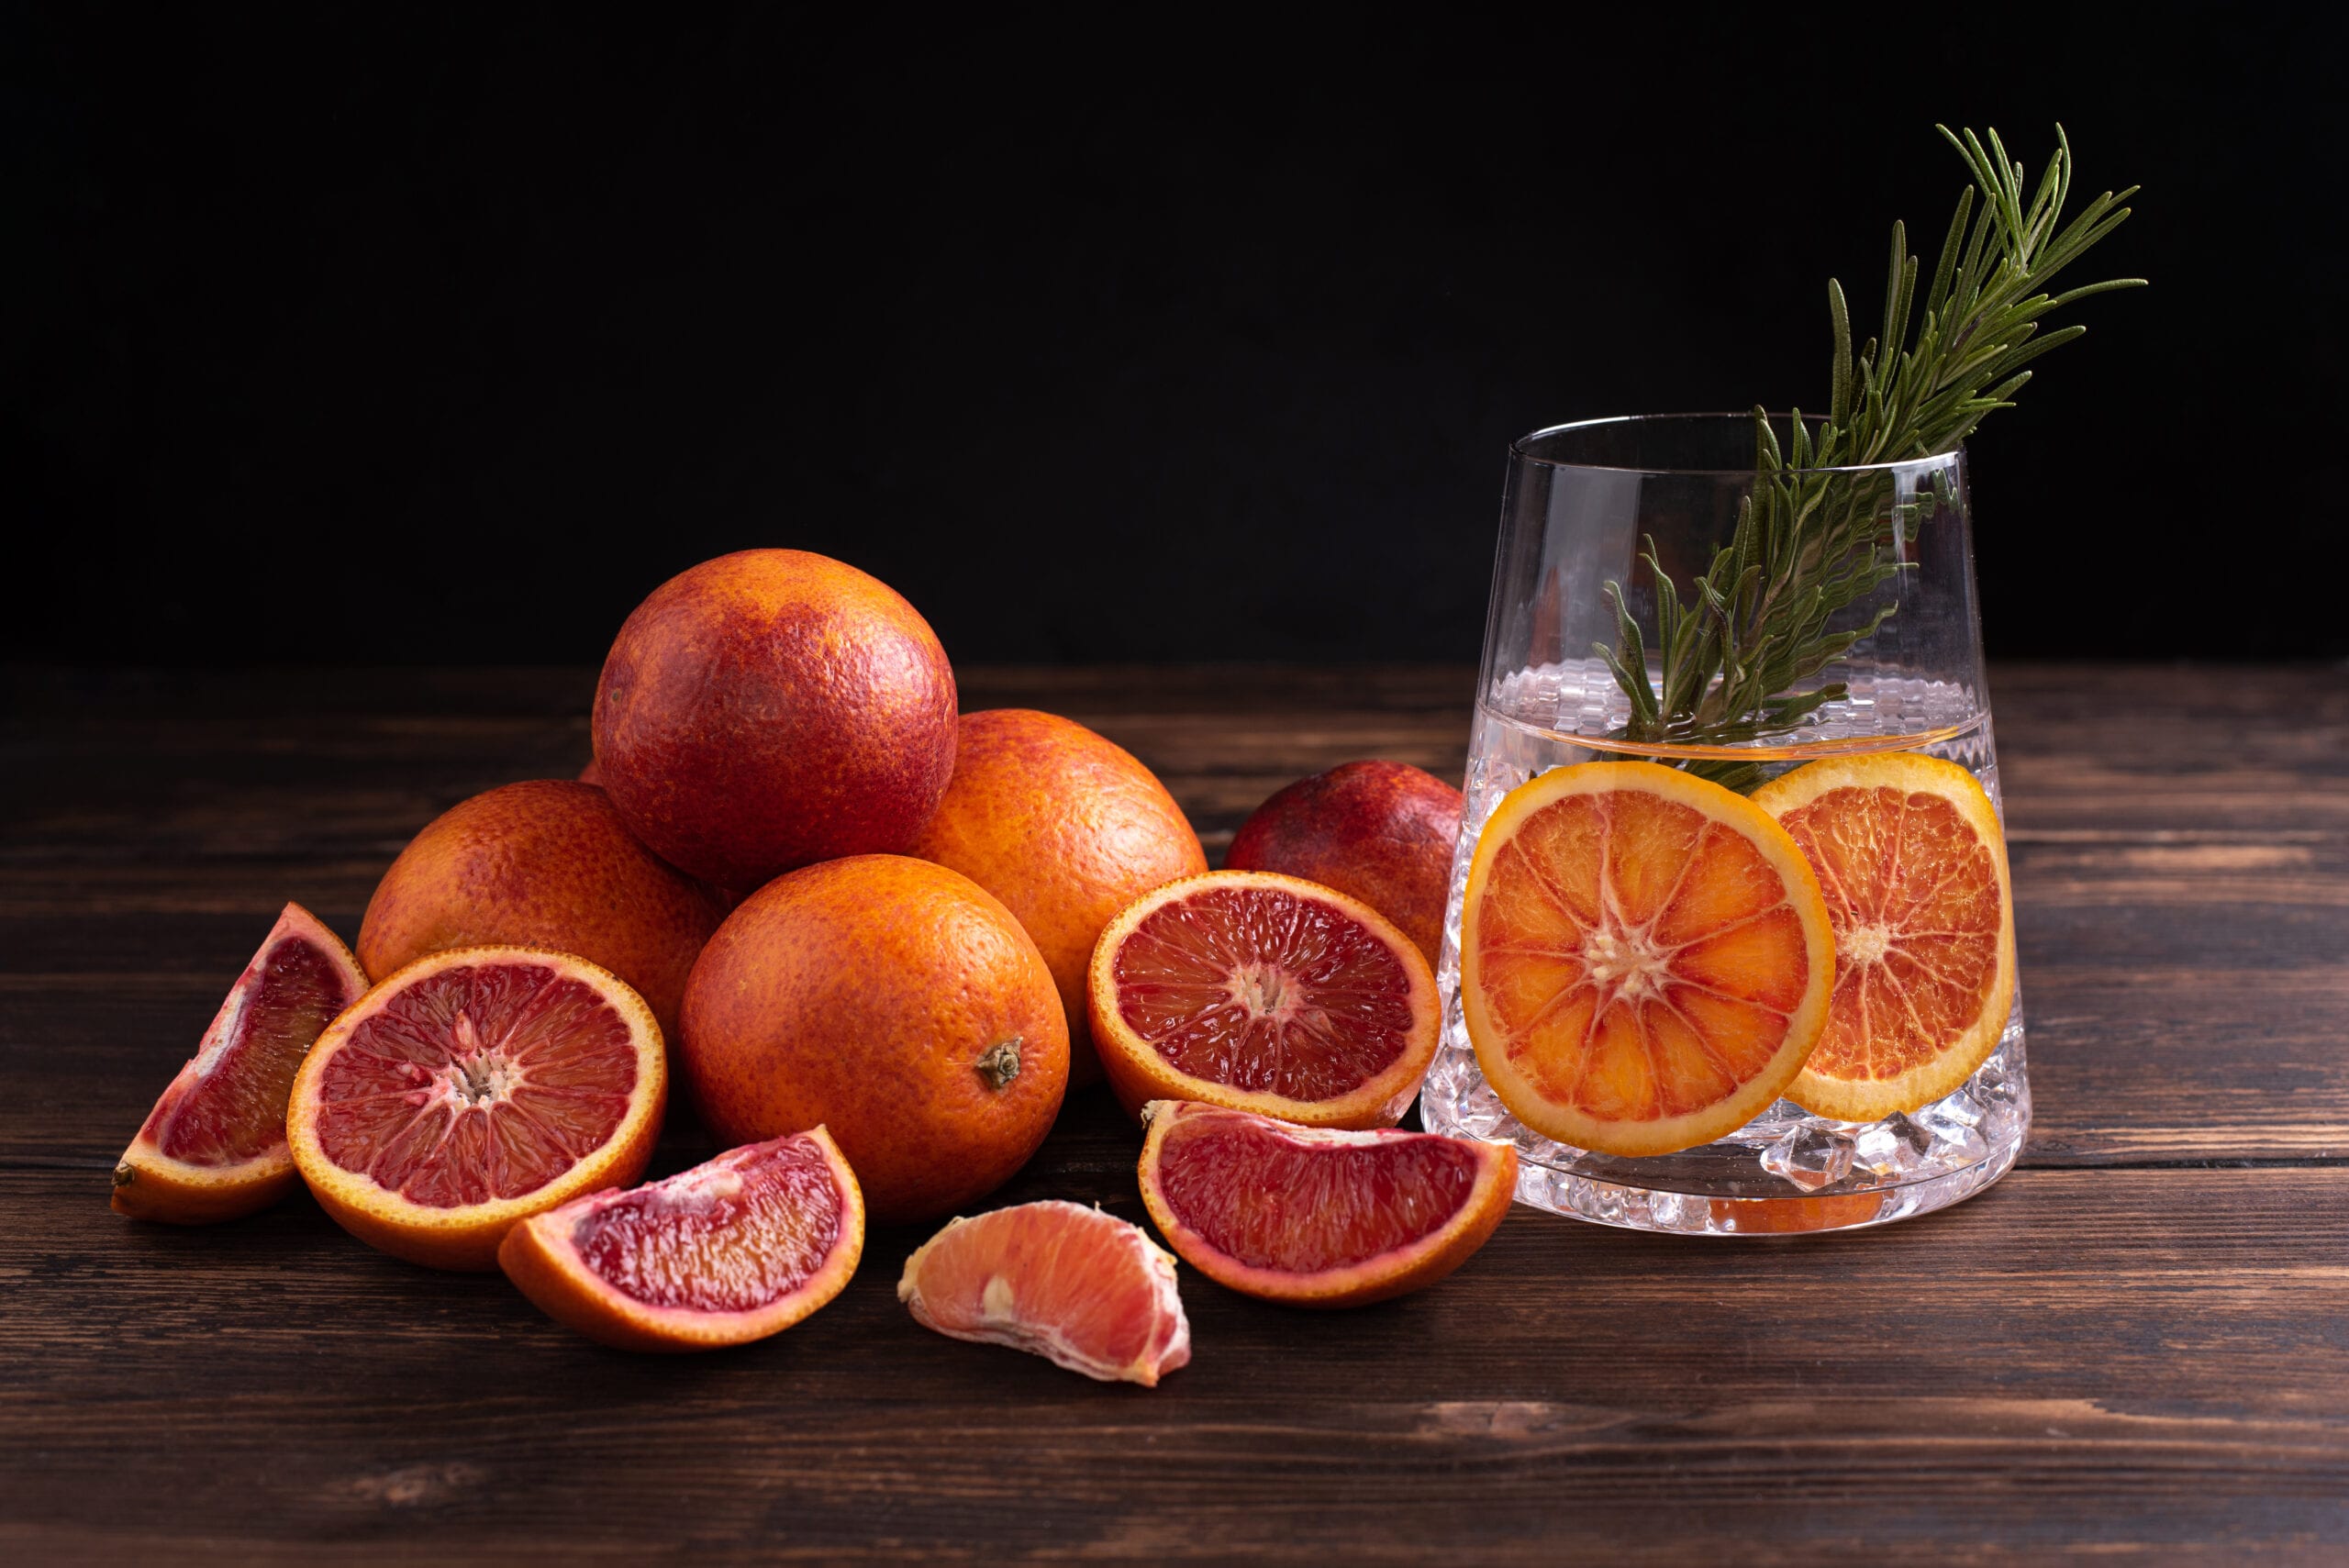 Blood Orange and Rosemary Gin presented in a glass tumbler. Blood orange fruits have been laid out on the table.